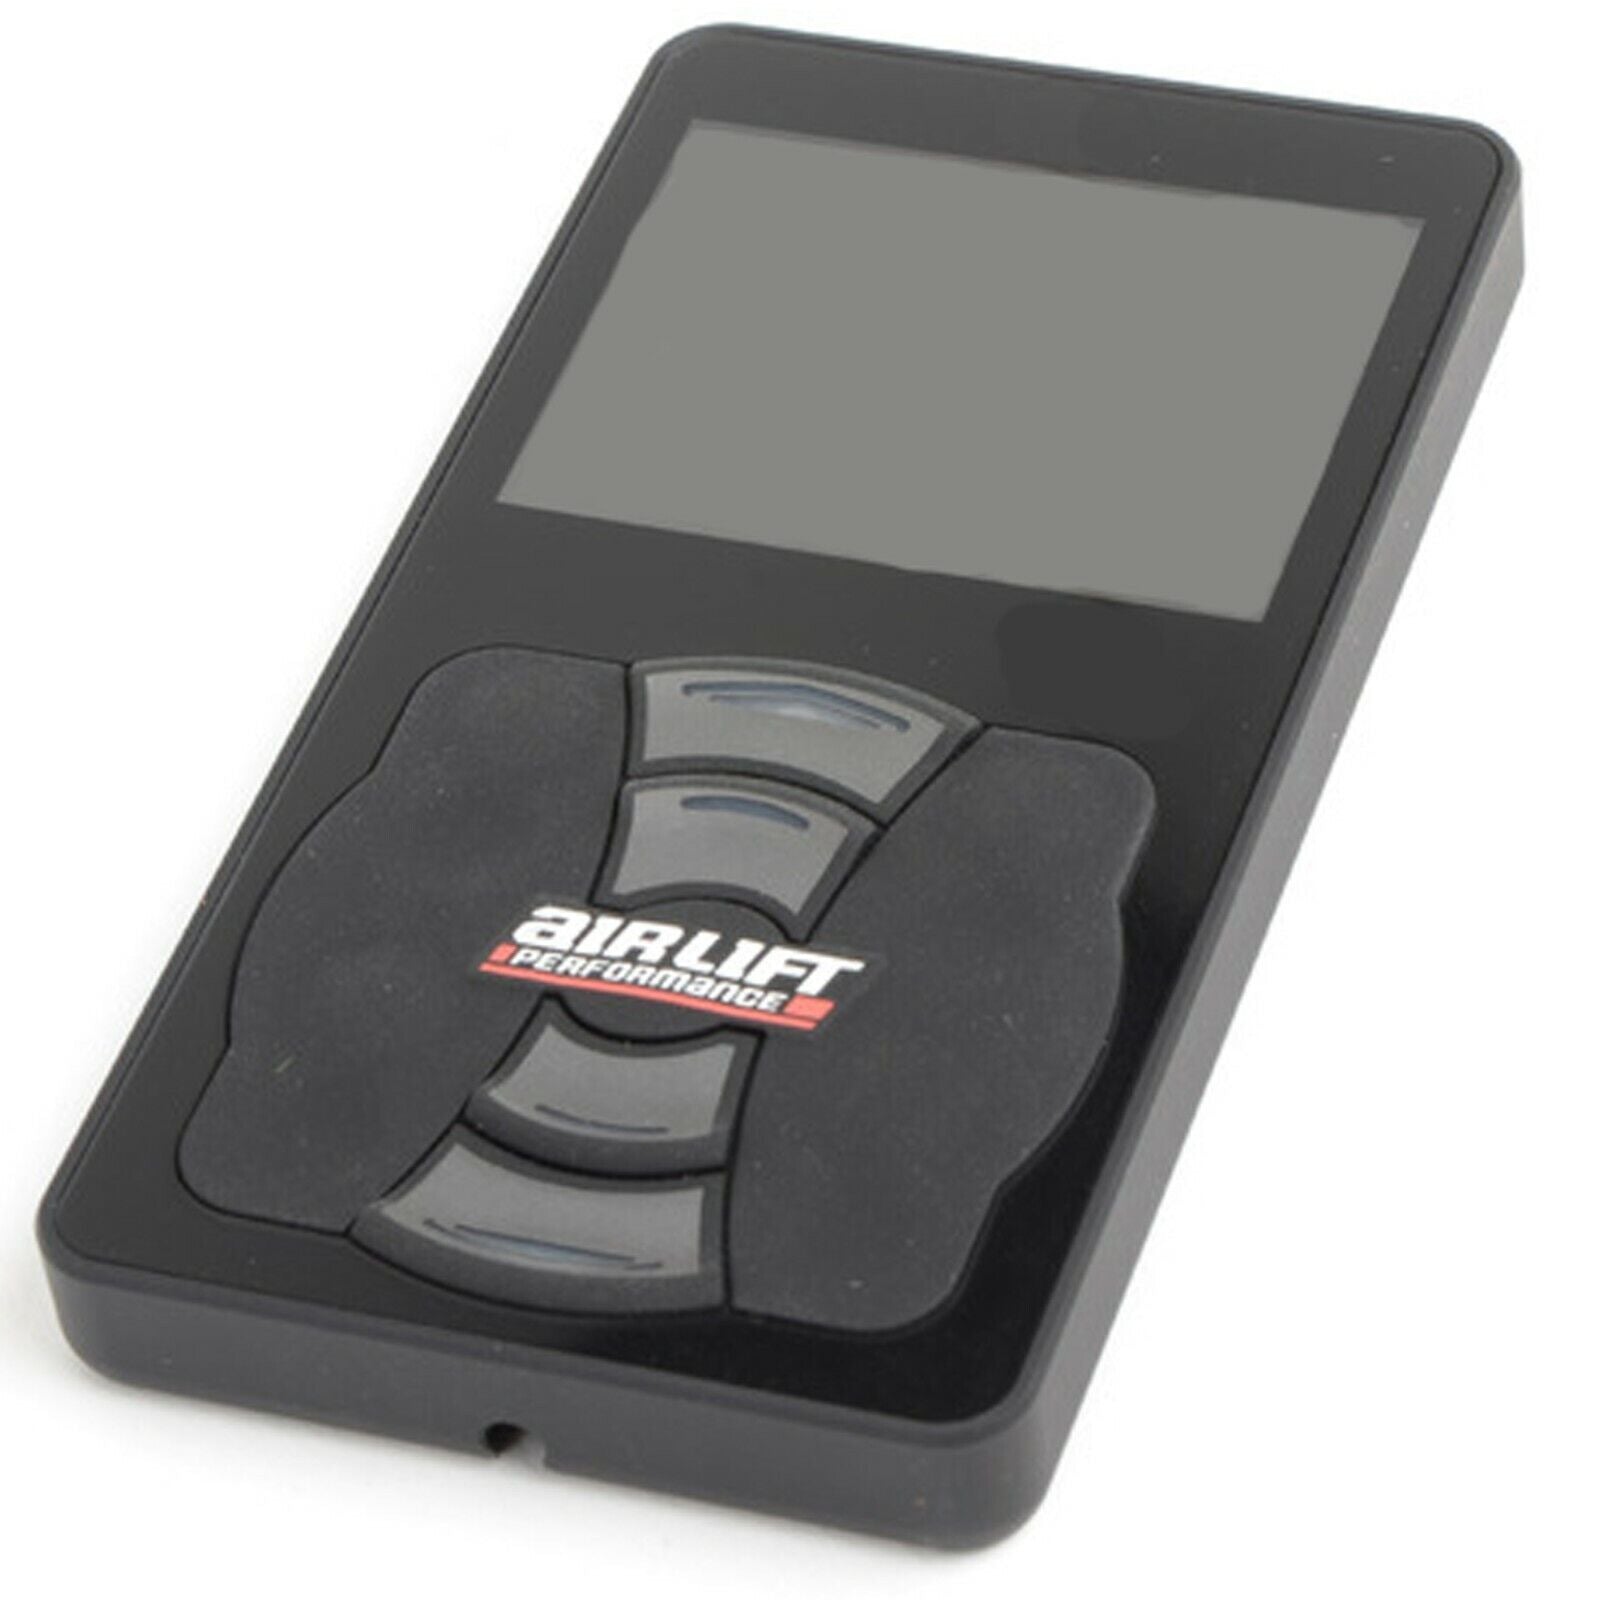 airlift performance touchpad